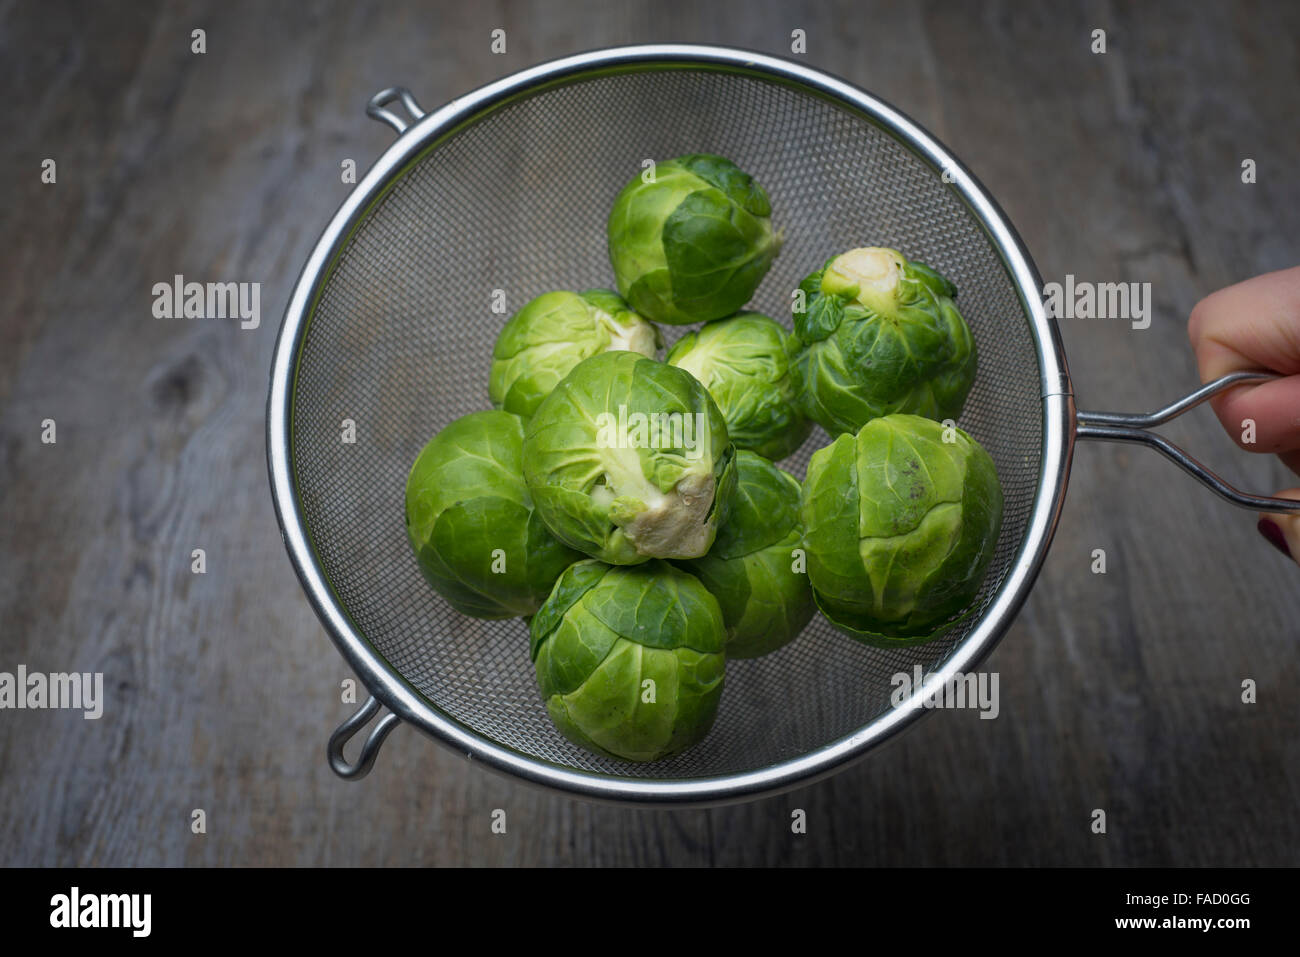 Brussel sprouts in a sieve for washing Stock Photo